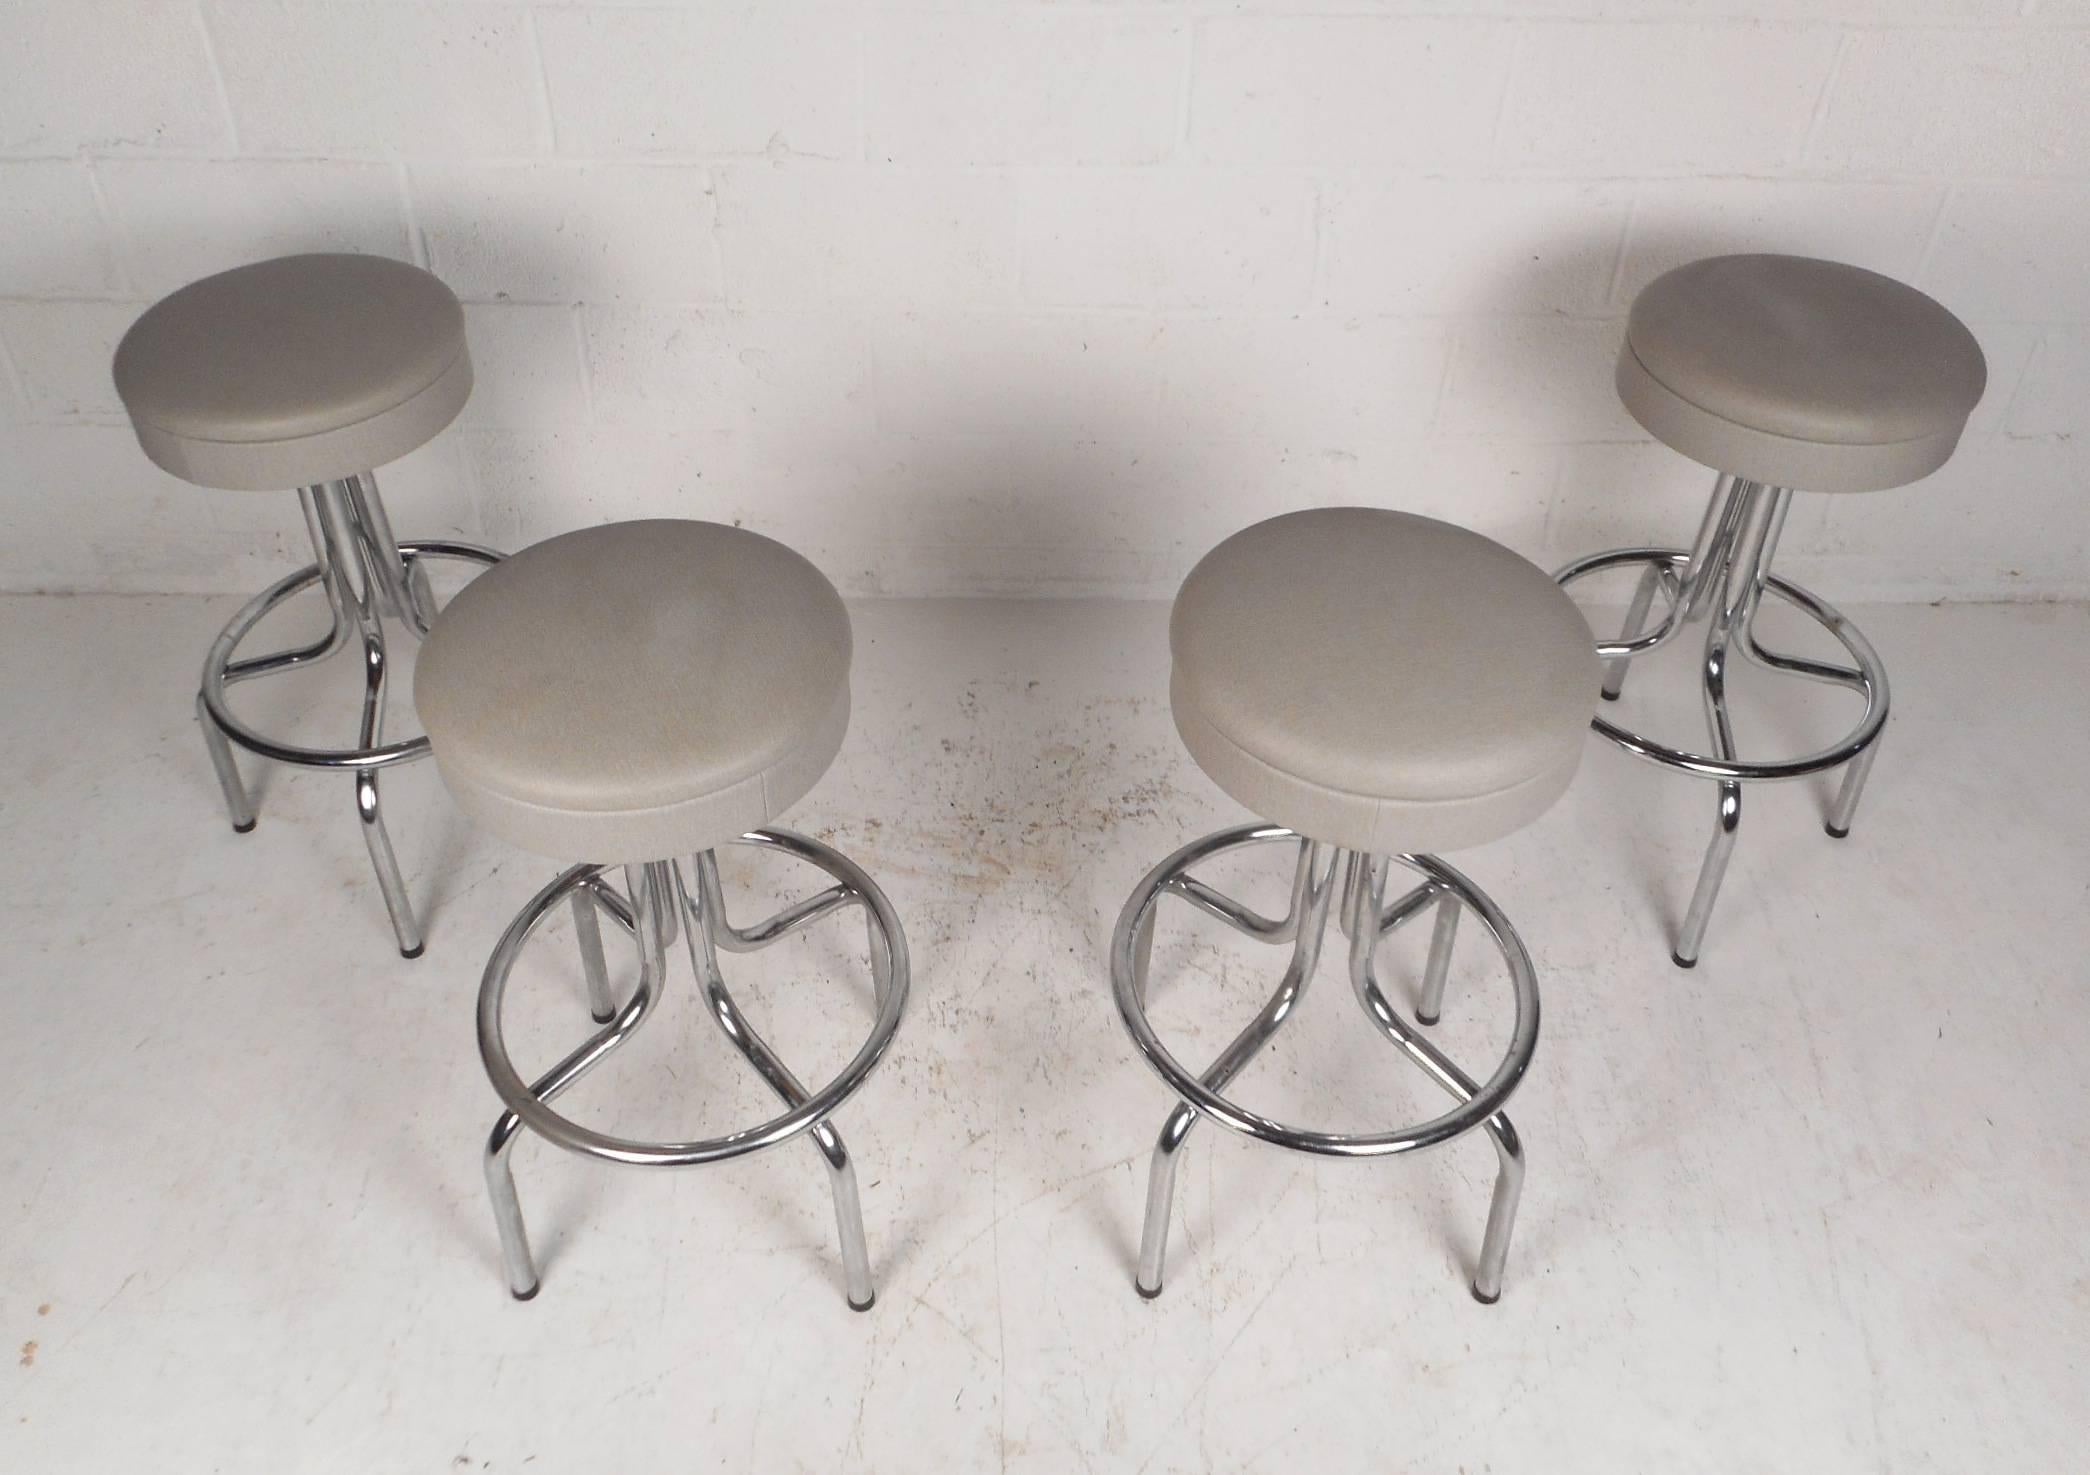 Beautiful set of four vintage modern bar stools with a swivel top and a bent rod chrome base. A thick padded seat covered in a fabulous light grey upholstery ensures maximum comfort and style. Quality construction made by Moreland and Dalton. This